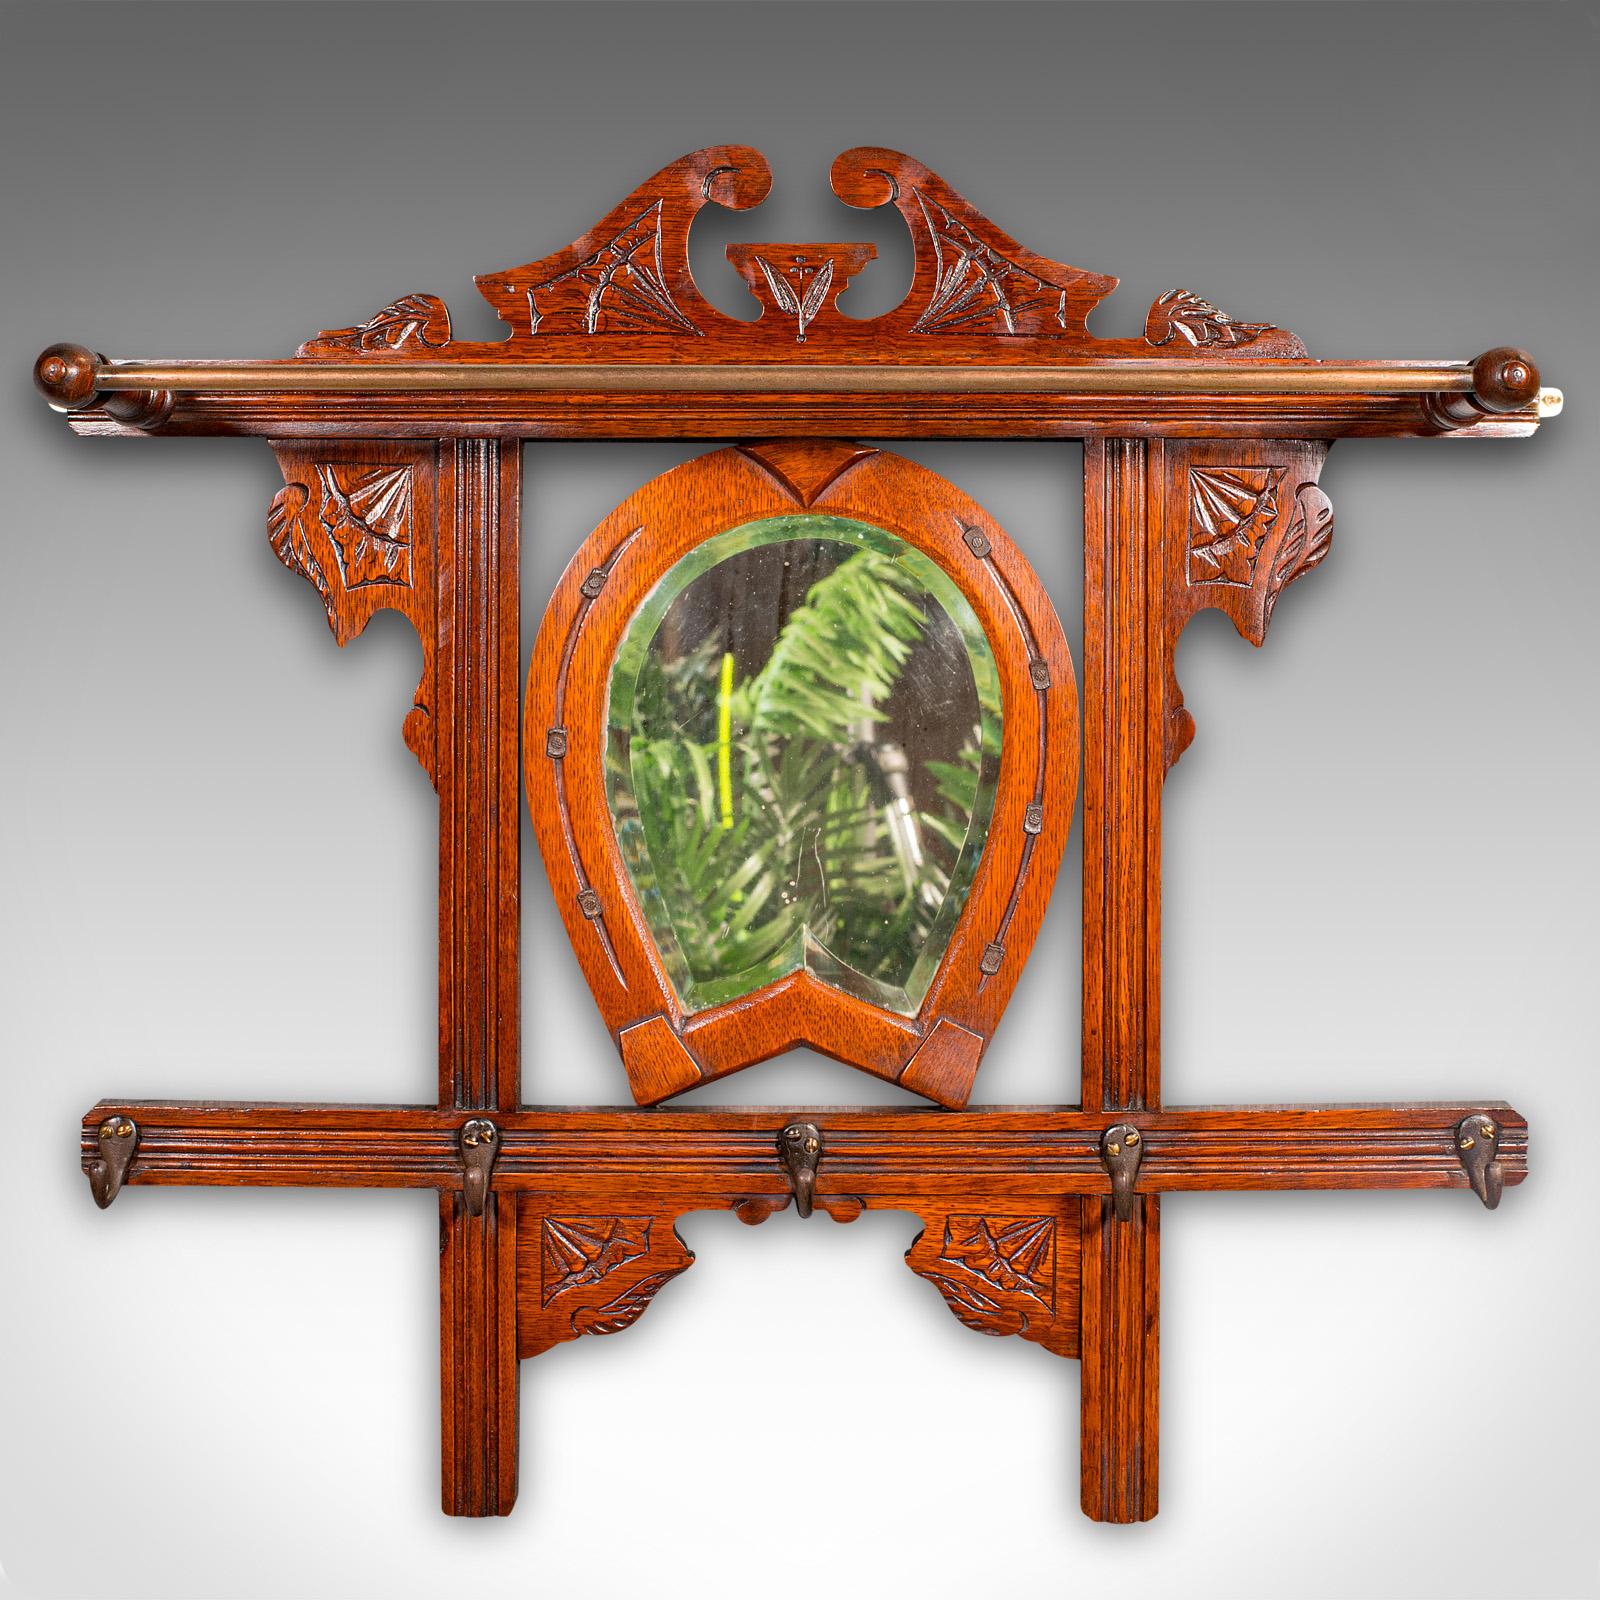 
This is an antique Cheltenham mirror. An English, oak and glass hall rack with equine overtones, dating to the Edwardian period, circa 1910.

Superb mirror, ideal for the hallway or a riding stables
Displays a desirable aged patina and in good